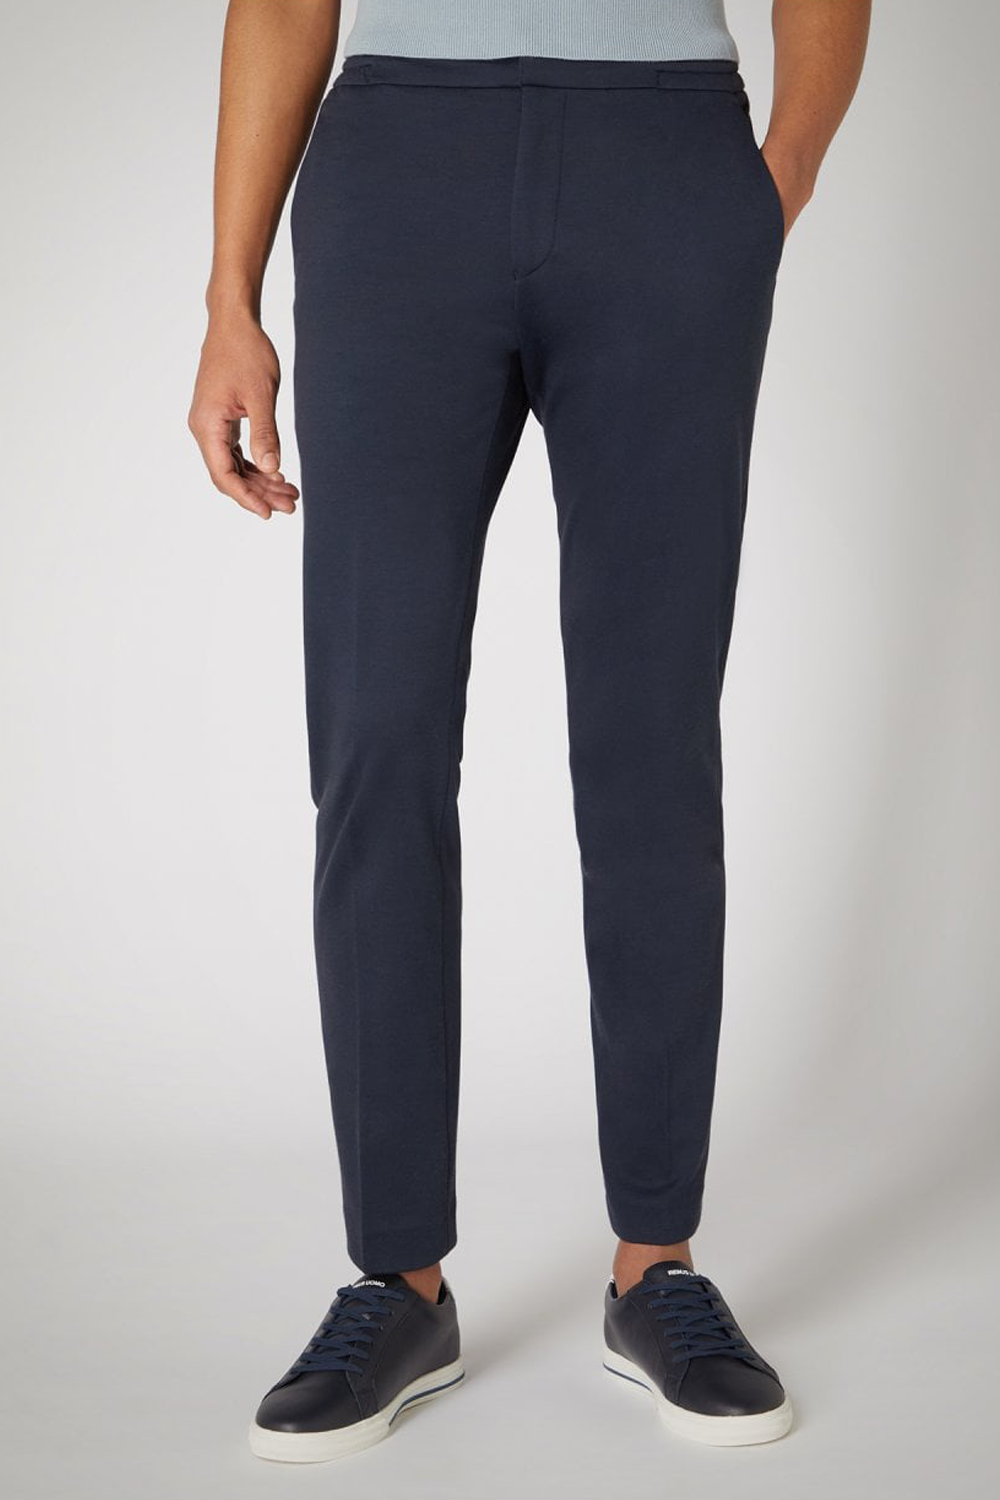 Buy the Remus Uomo Drawstring Waist Trouser Navy at Intro. Spend £50 for free UK delivery. Official stockists. We ship worldwide.